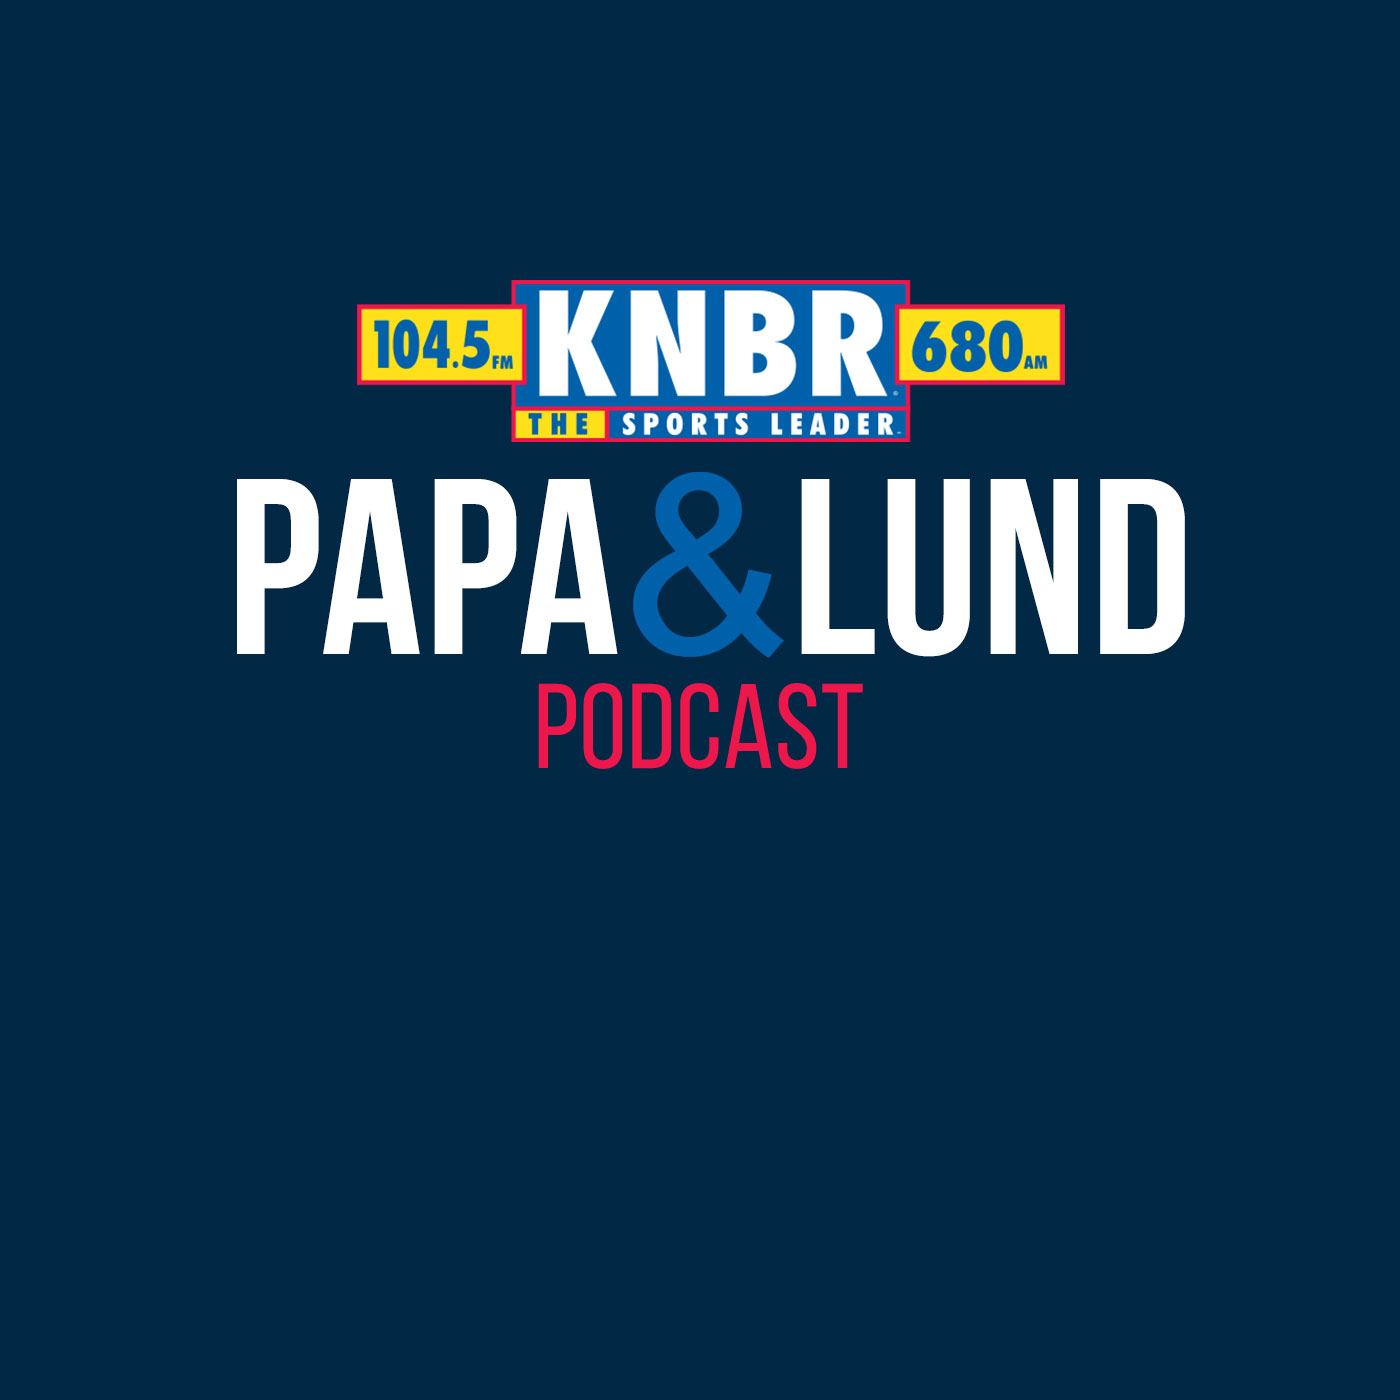 3-4 Papa & Lund Show - Hour 2- Papa & Lund look at the Chapman deal and discuss if they could get Snell on a similar deal to improve the pitching staff